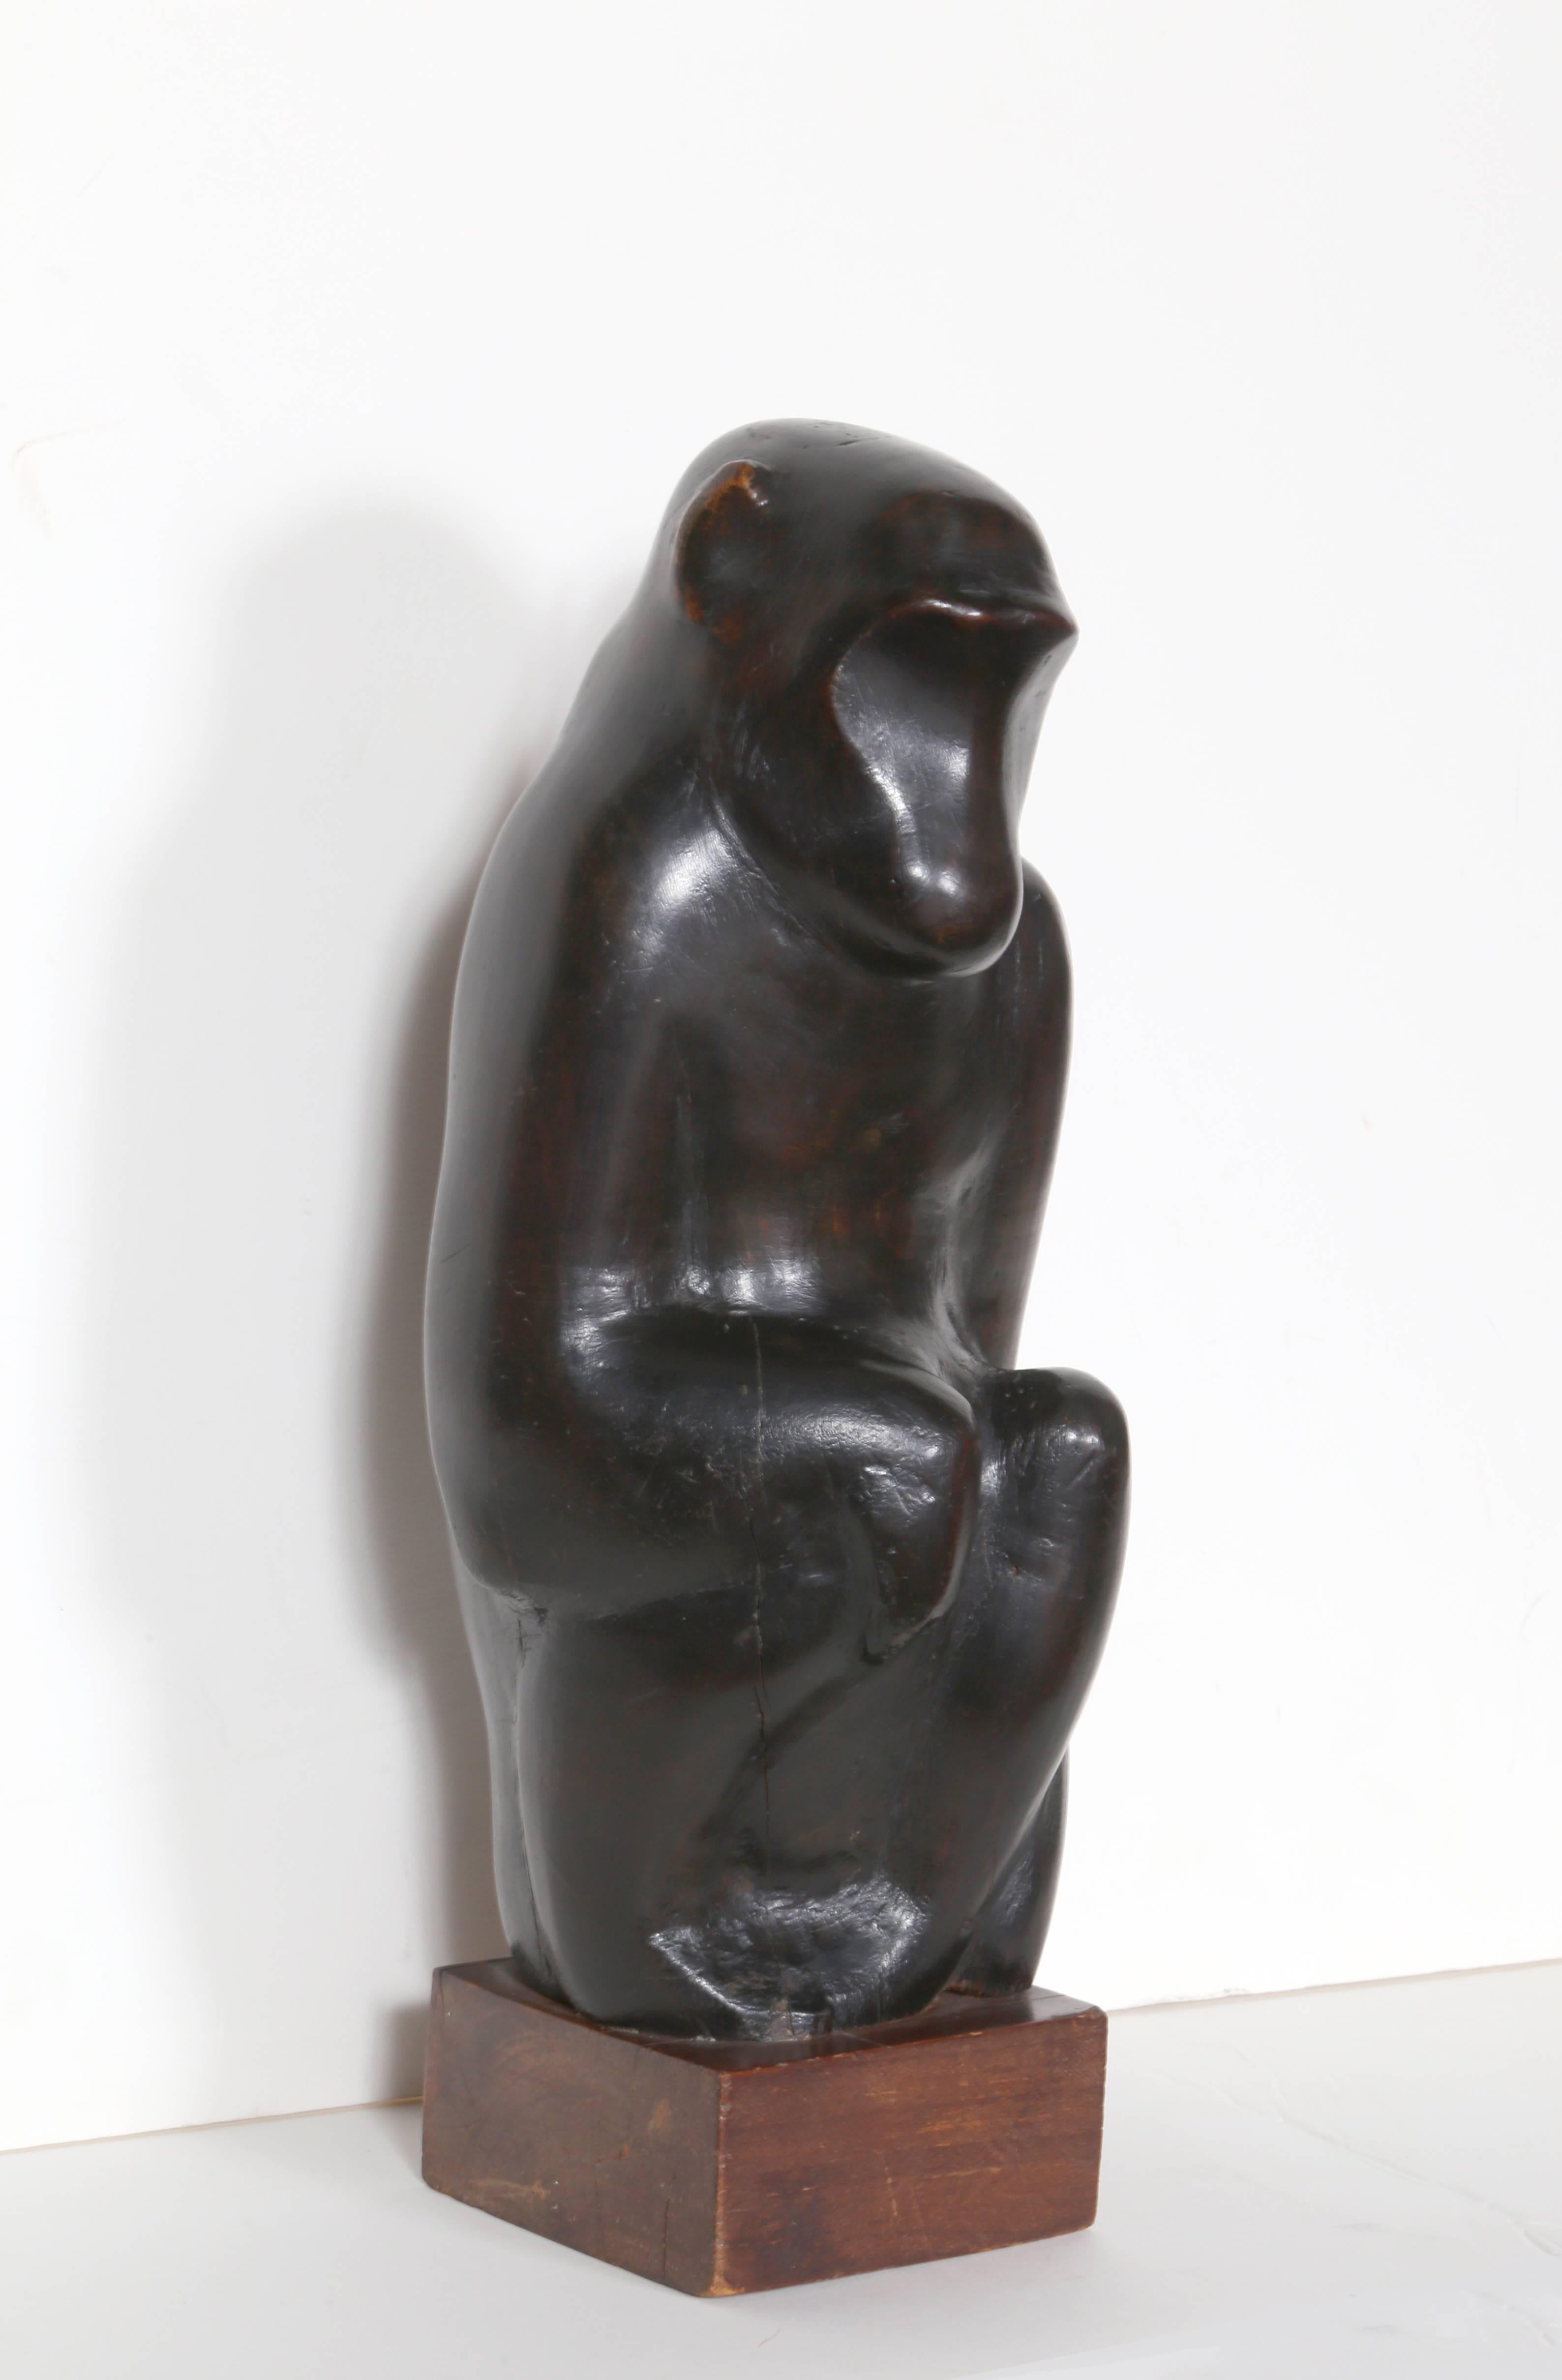 Artist: George Zachary Constant, Greek/American (1892 - 1978)
Title: Monkey
Year: circa 1954
Medium: Hand-Carved Wood Sculpture
Base Size: 4 x 4 x 2 inches
Size: 13.5  x 4.5  x 5.5 in. (34.29  x 11.43  x 13.97 cm)